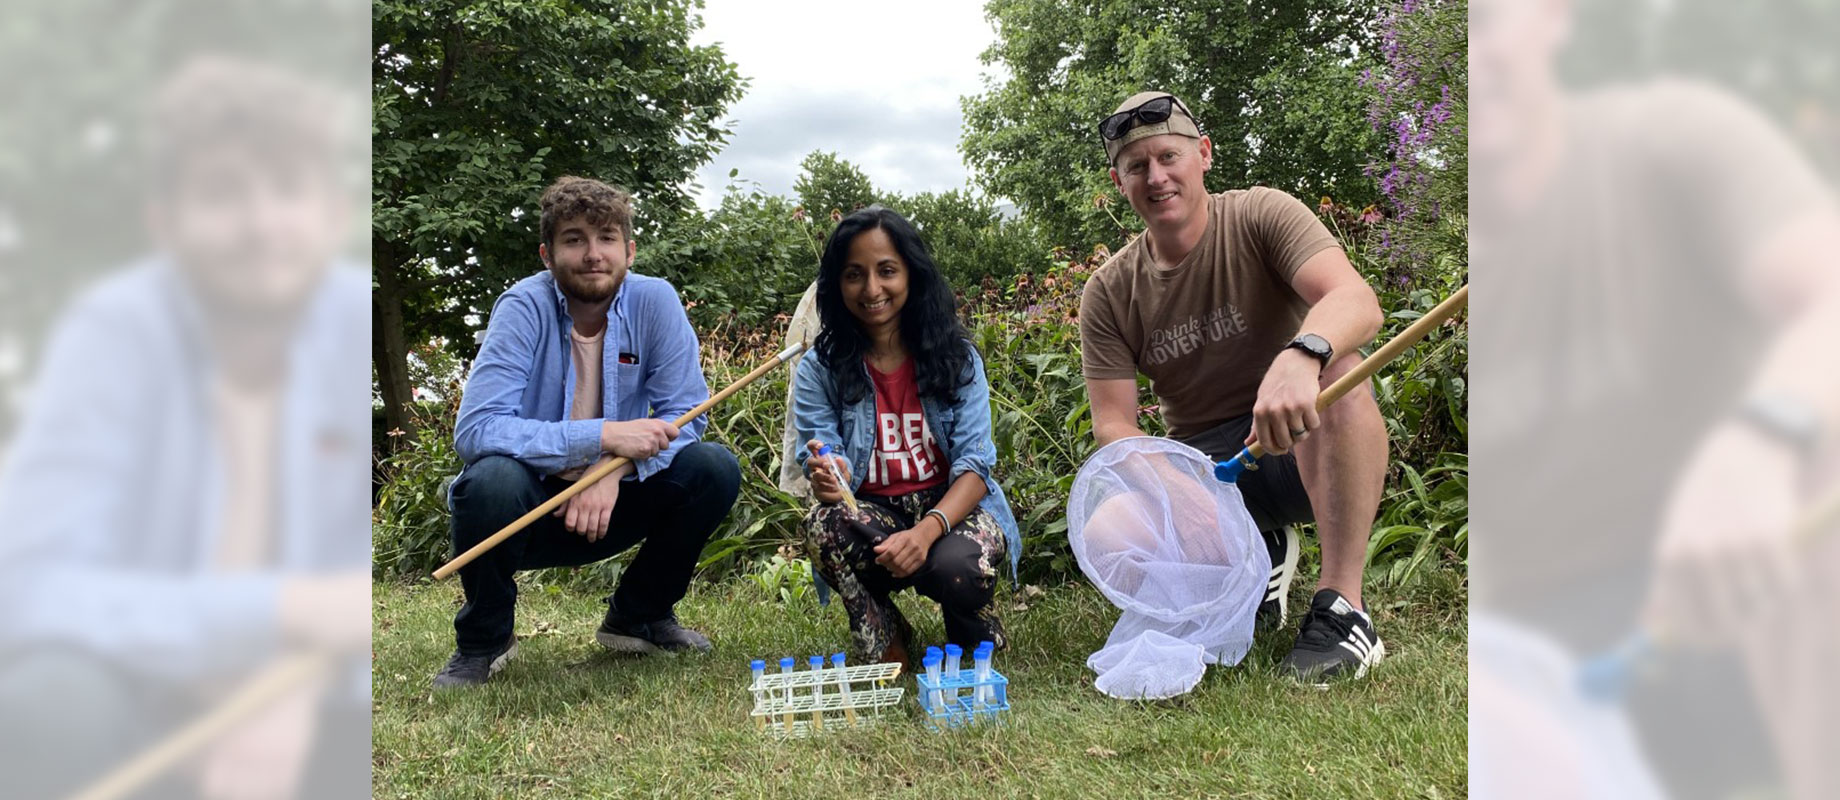 Simpson College student Ethan Madden (left), biology professor Aswati Subramanian (center) and West Hill Brewing Company owner Doug Gaumer (right) pose in a local park.